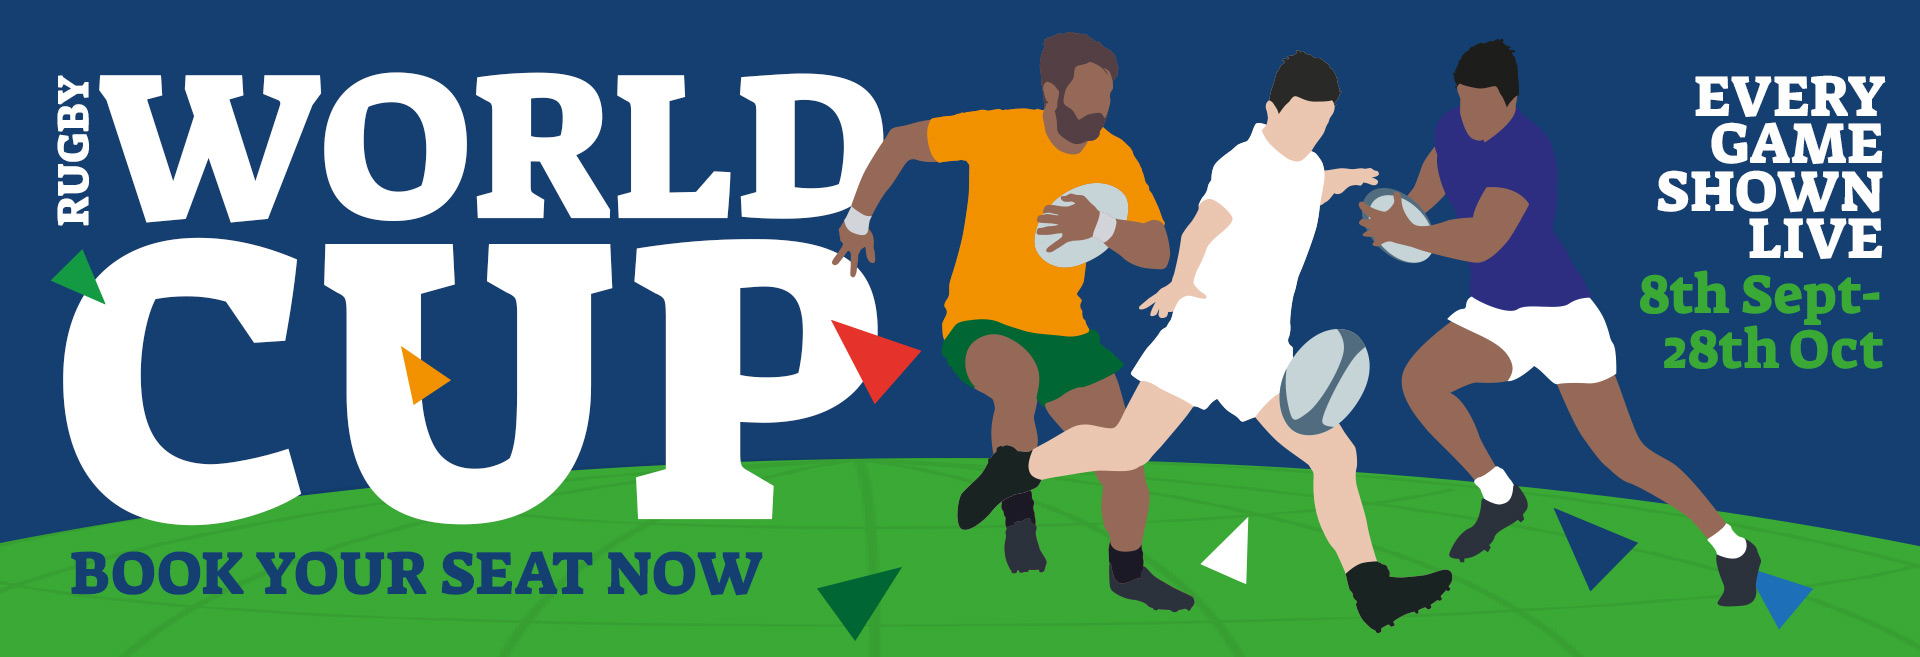 Watch the Rugby World Cup at The Ranelagh